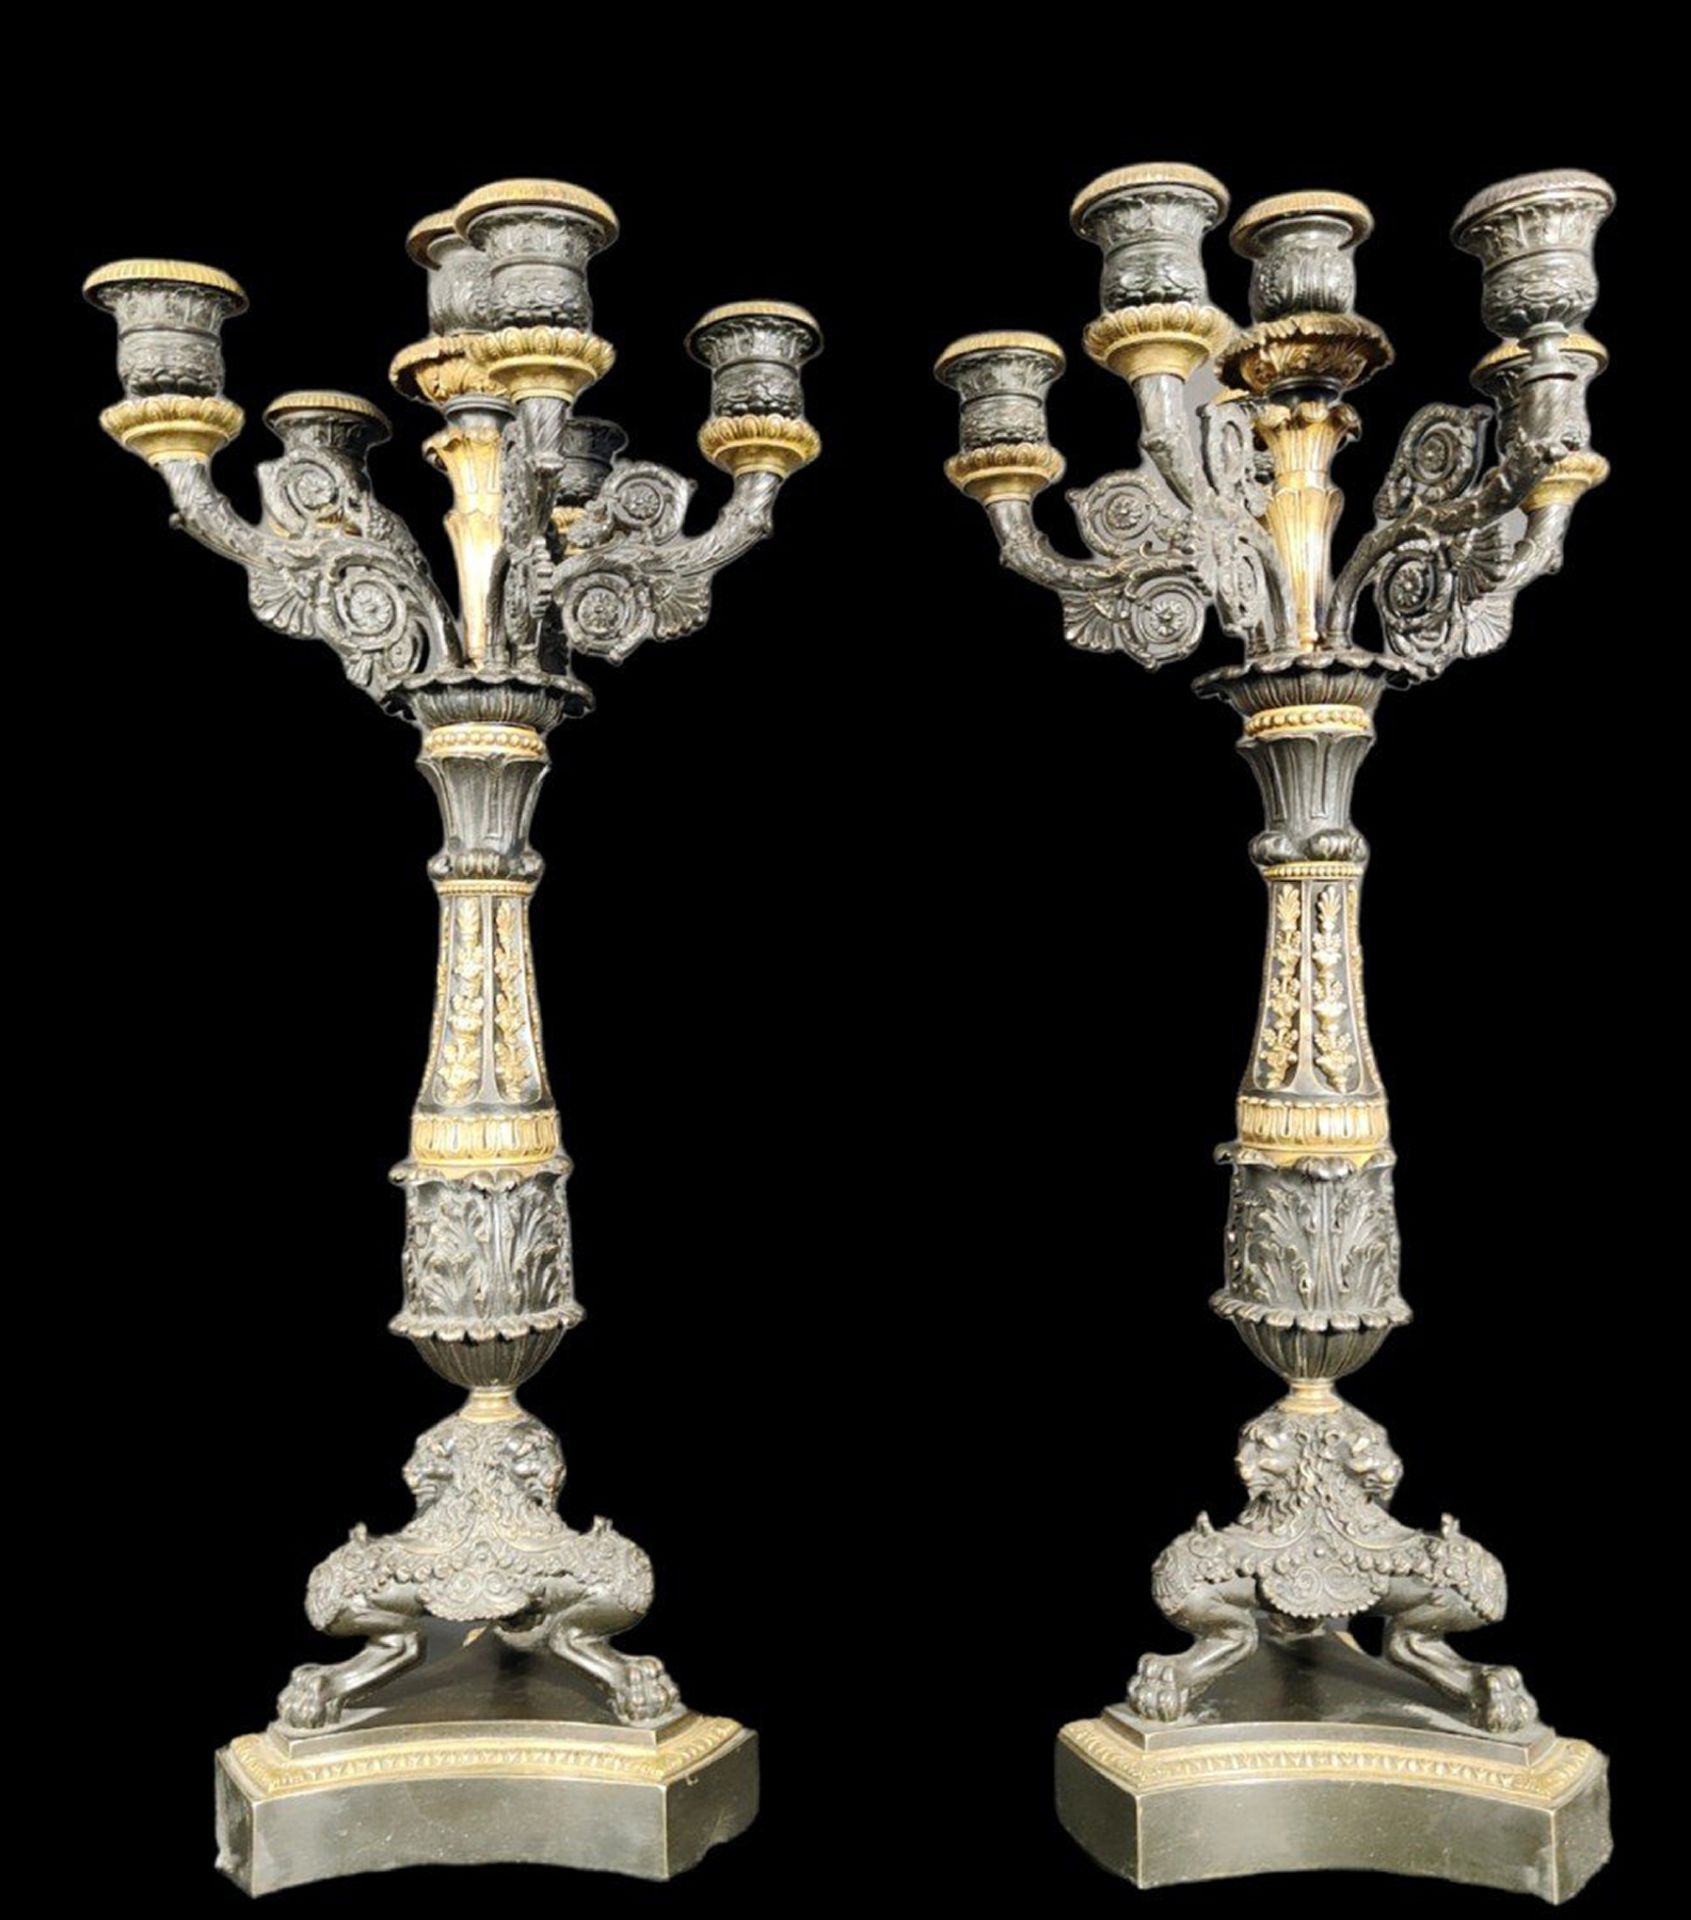 Pair of 19th century French candlesticks in gilt bronze - Image 10 of 10